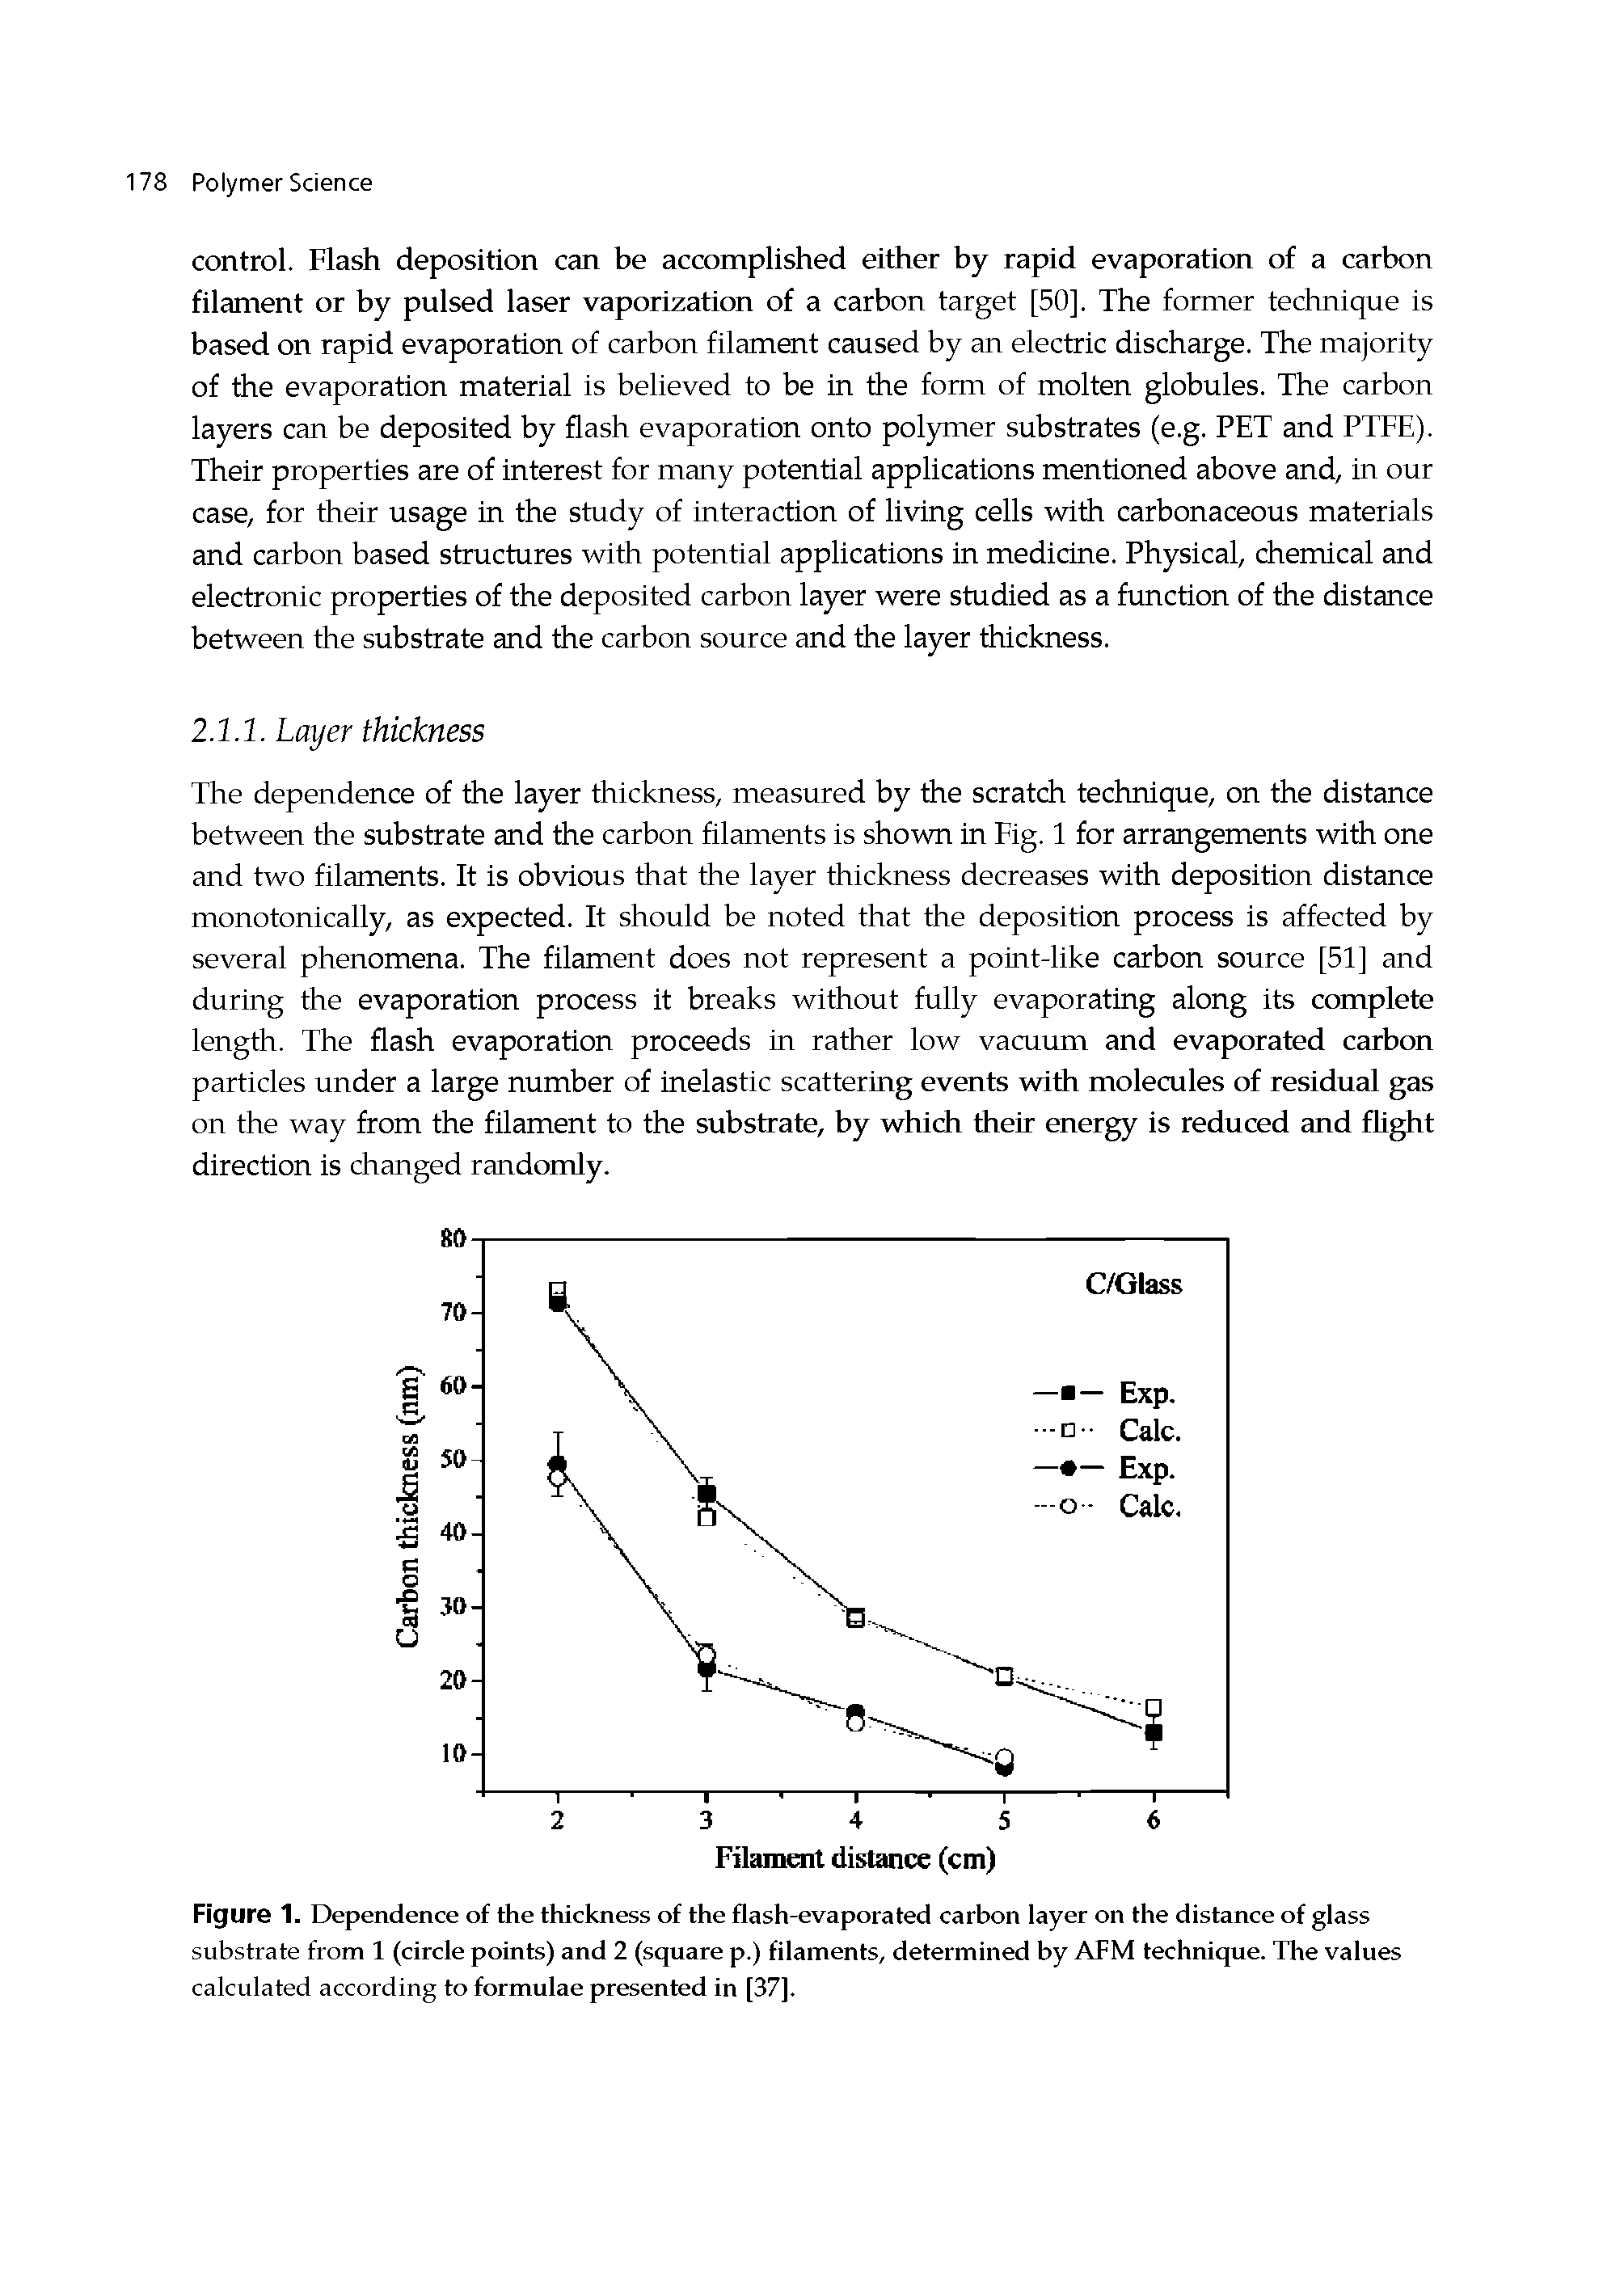 Figure 1. Dependence of the thickness of the flash-evaporated carbon layer on the distance of glass substrate from 1 (circle points) and 2 (square p.) filaments, determined by AFM technique. The values calculated according to formulae presented in [37].